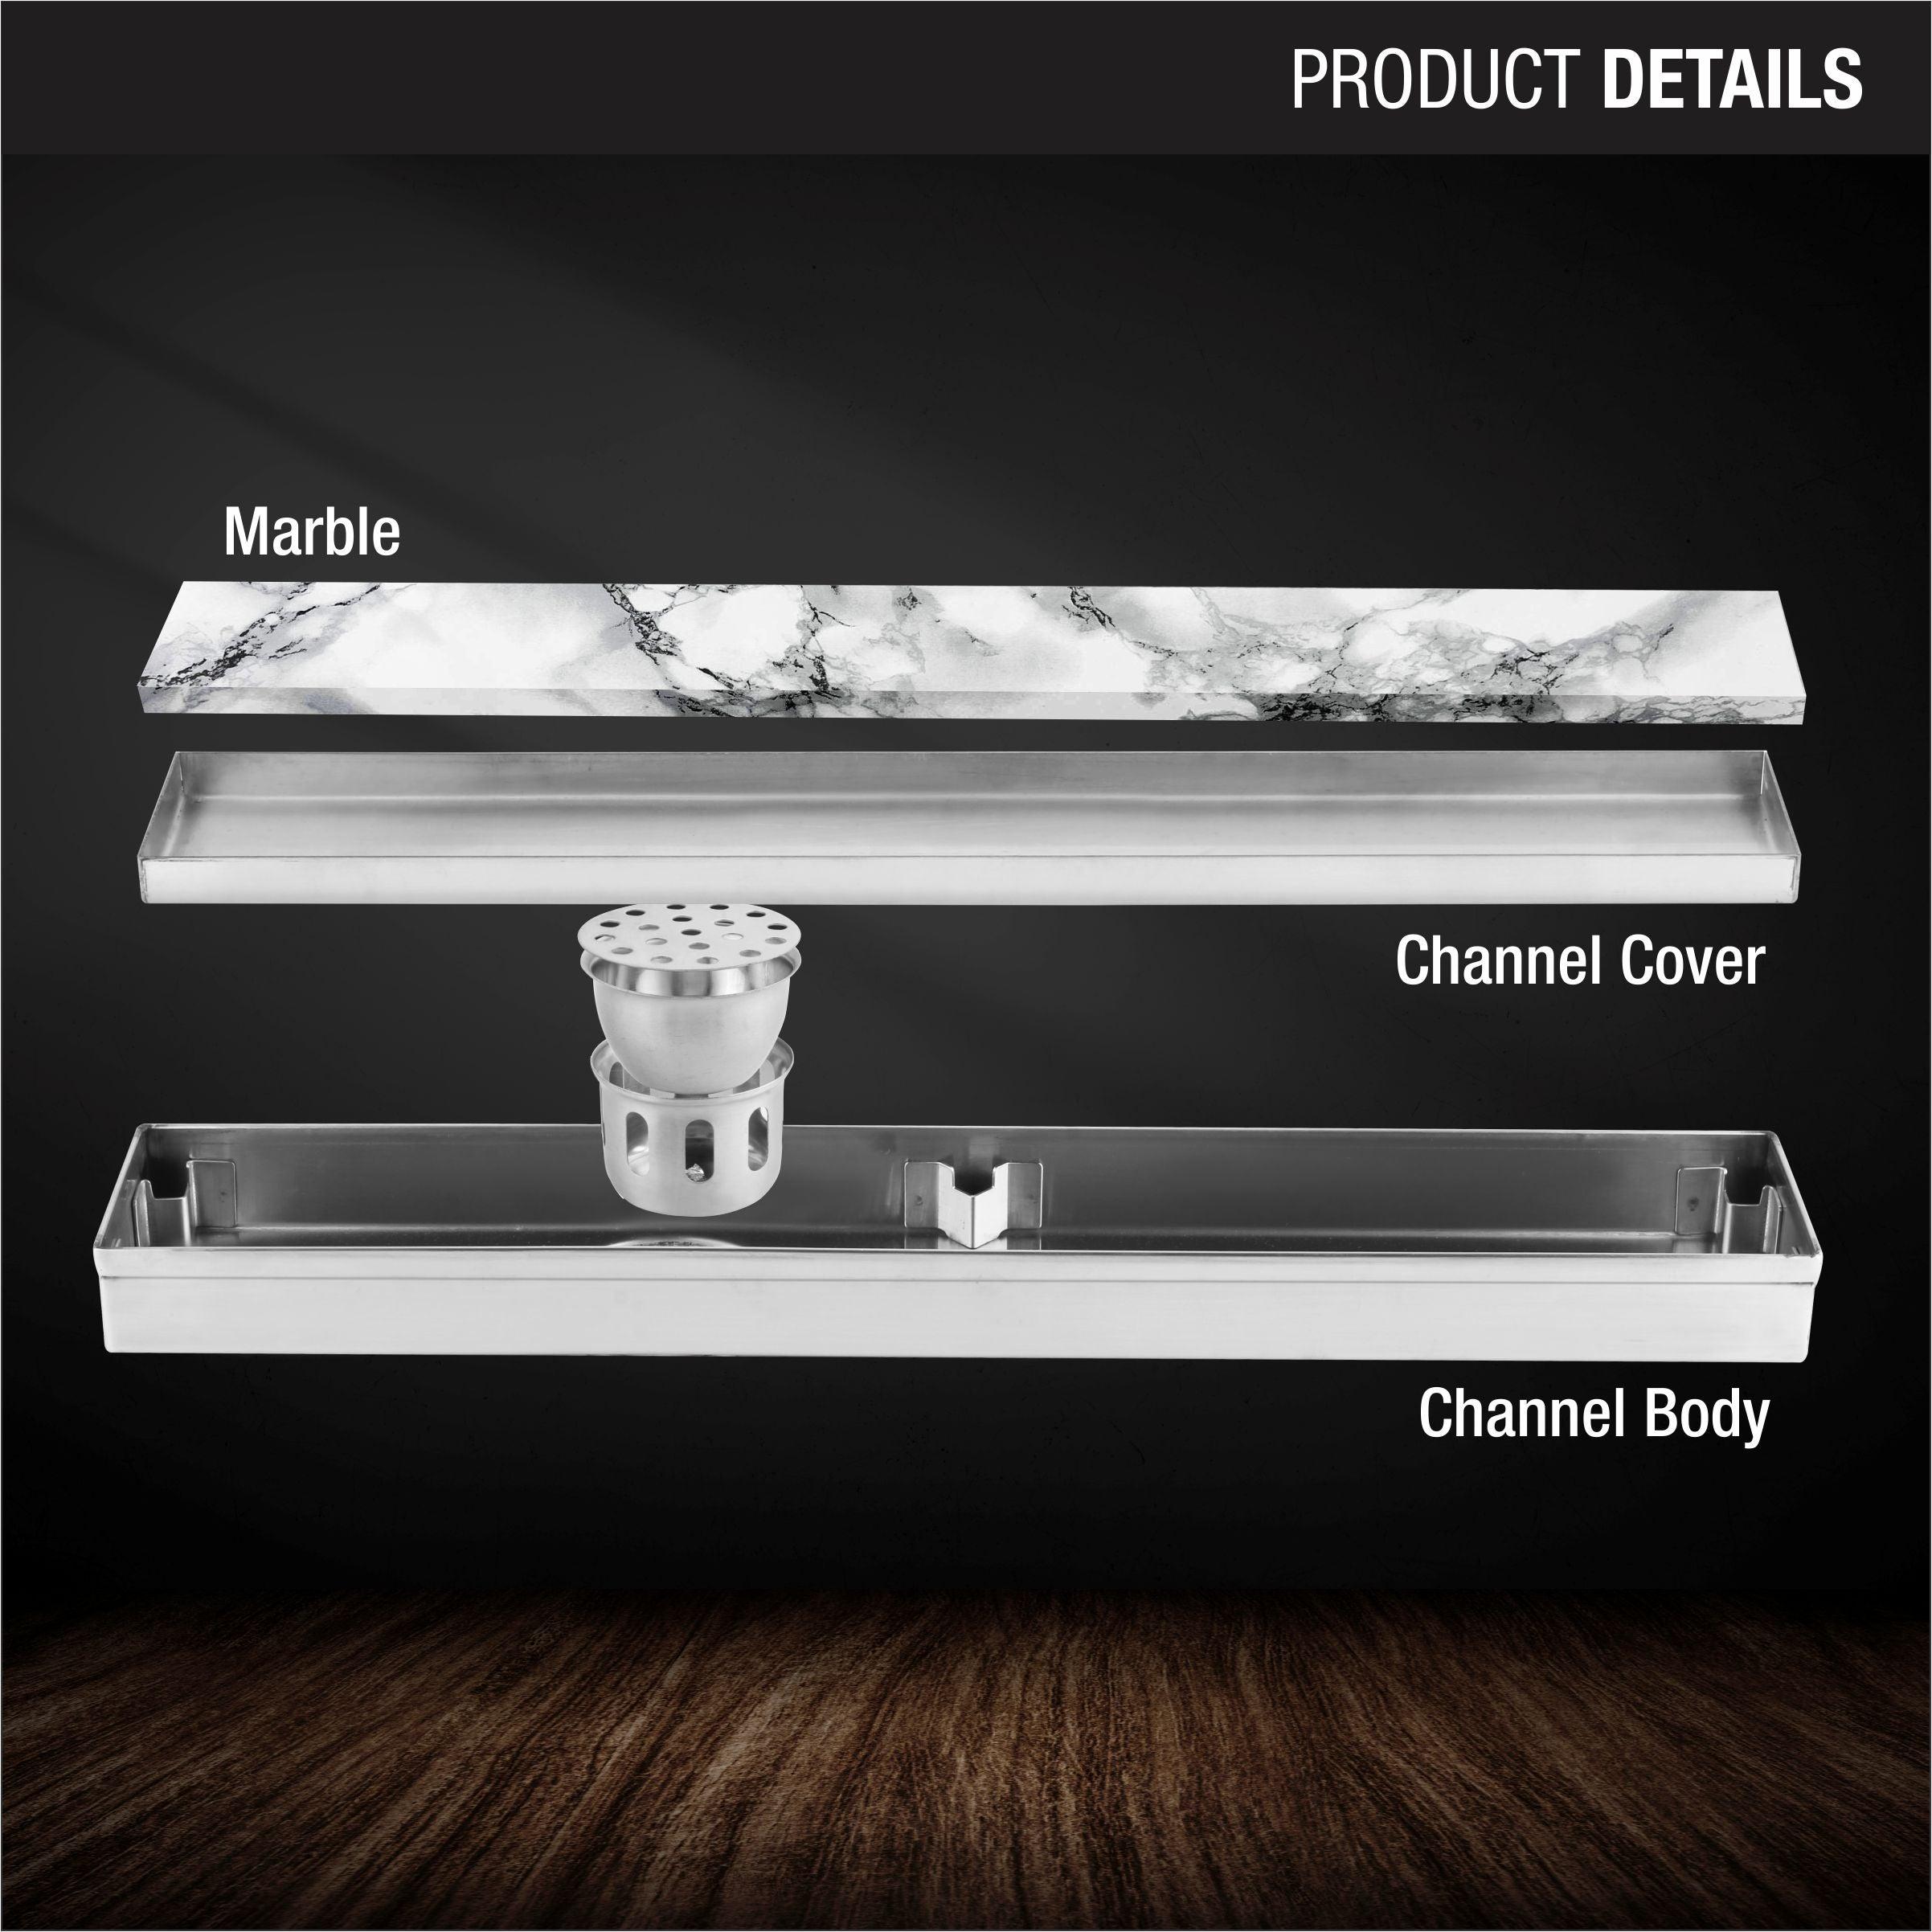 Marble Insert Shower Drain Channel (40 x 3 Inches) product details